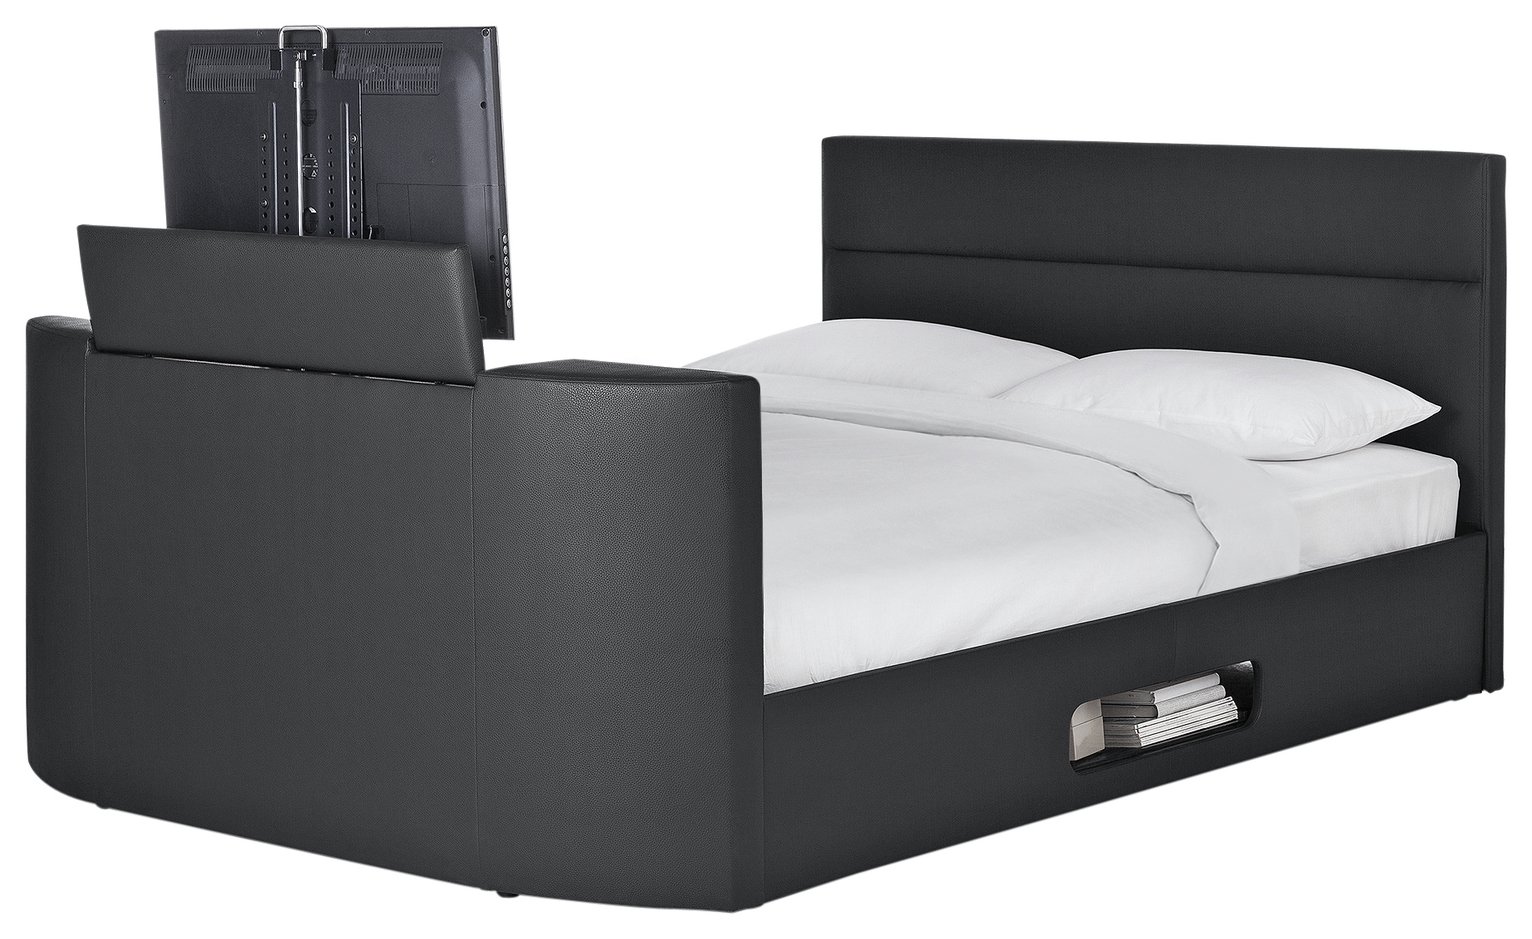 Argos Home Gemini Double TV Bed Frame Review